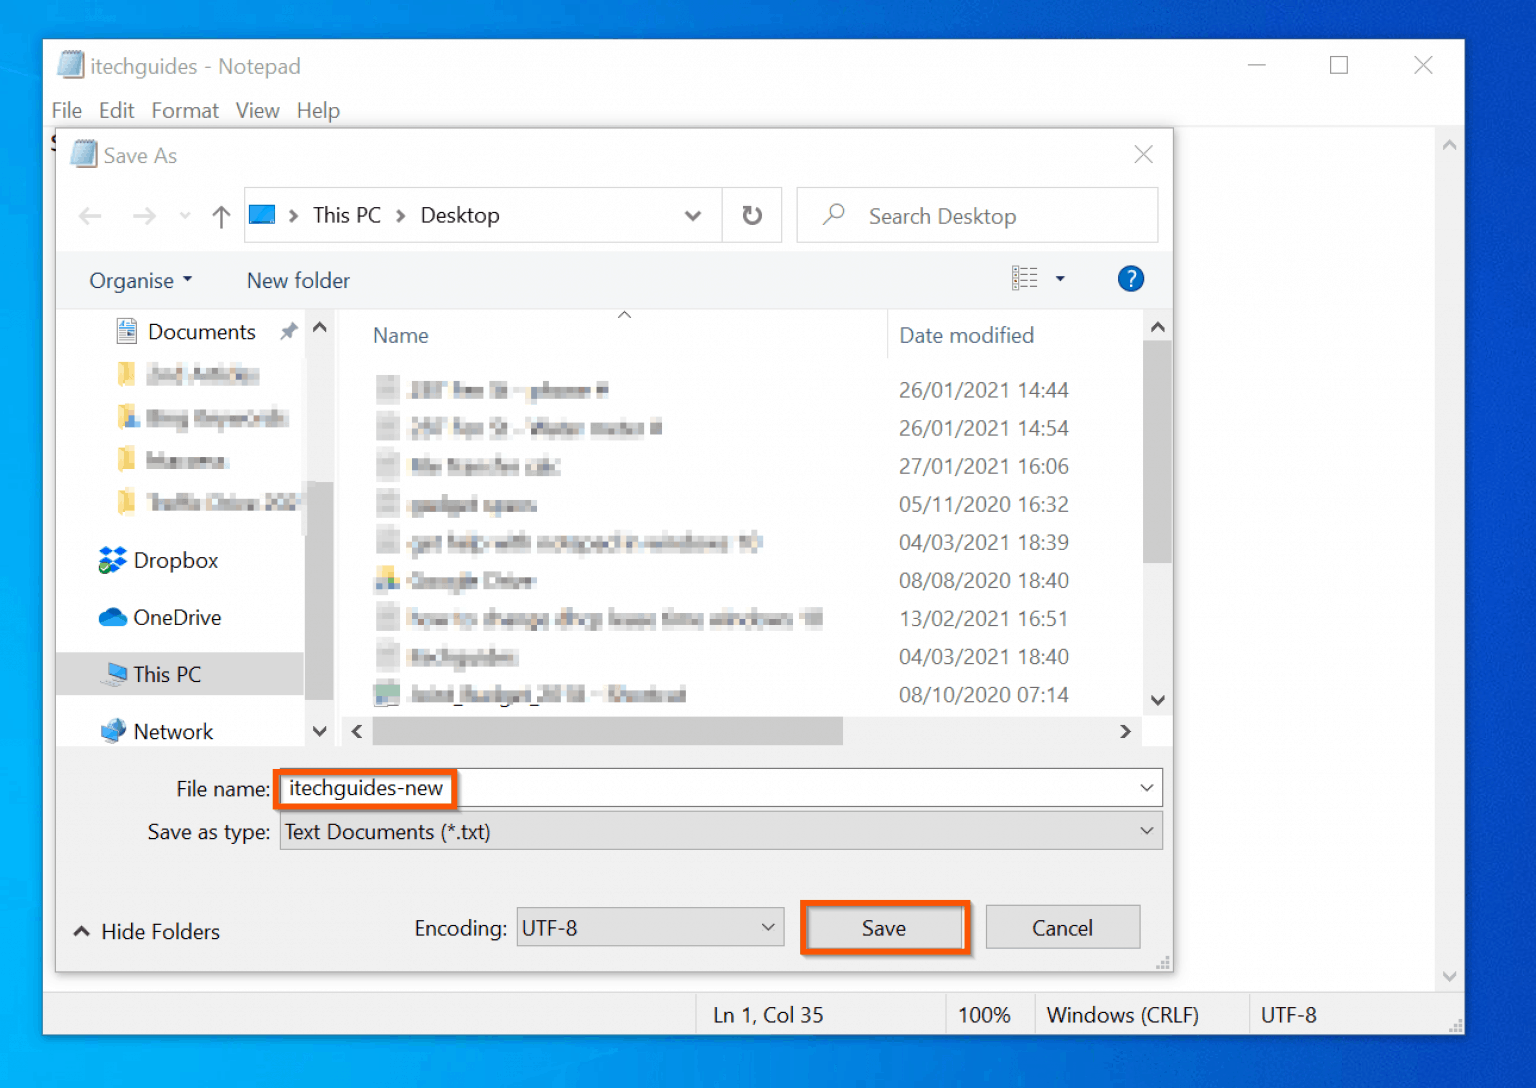 recover notepad file windows 10